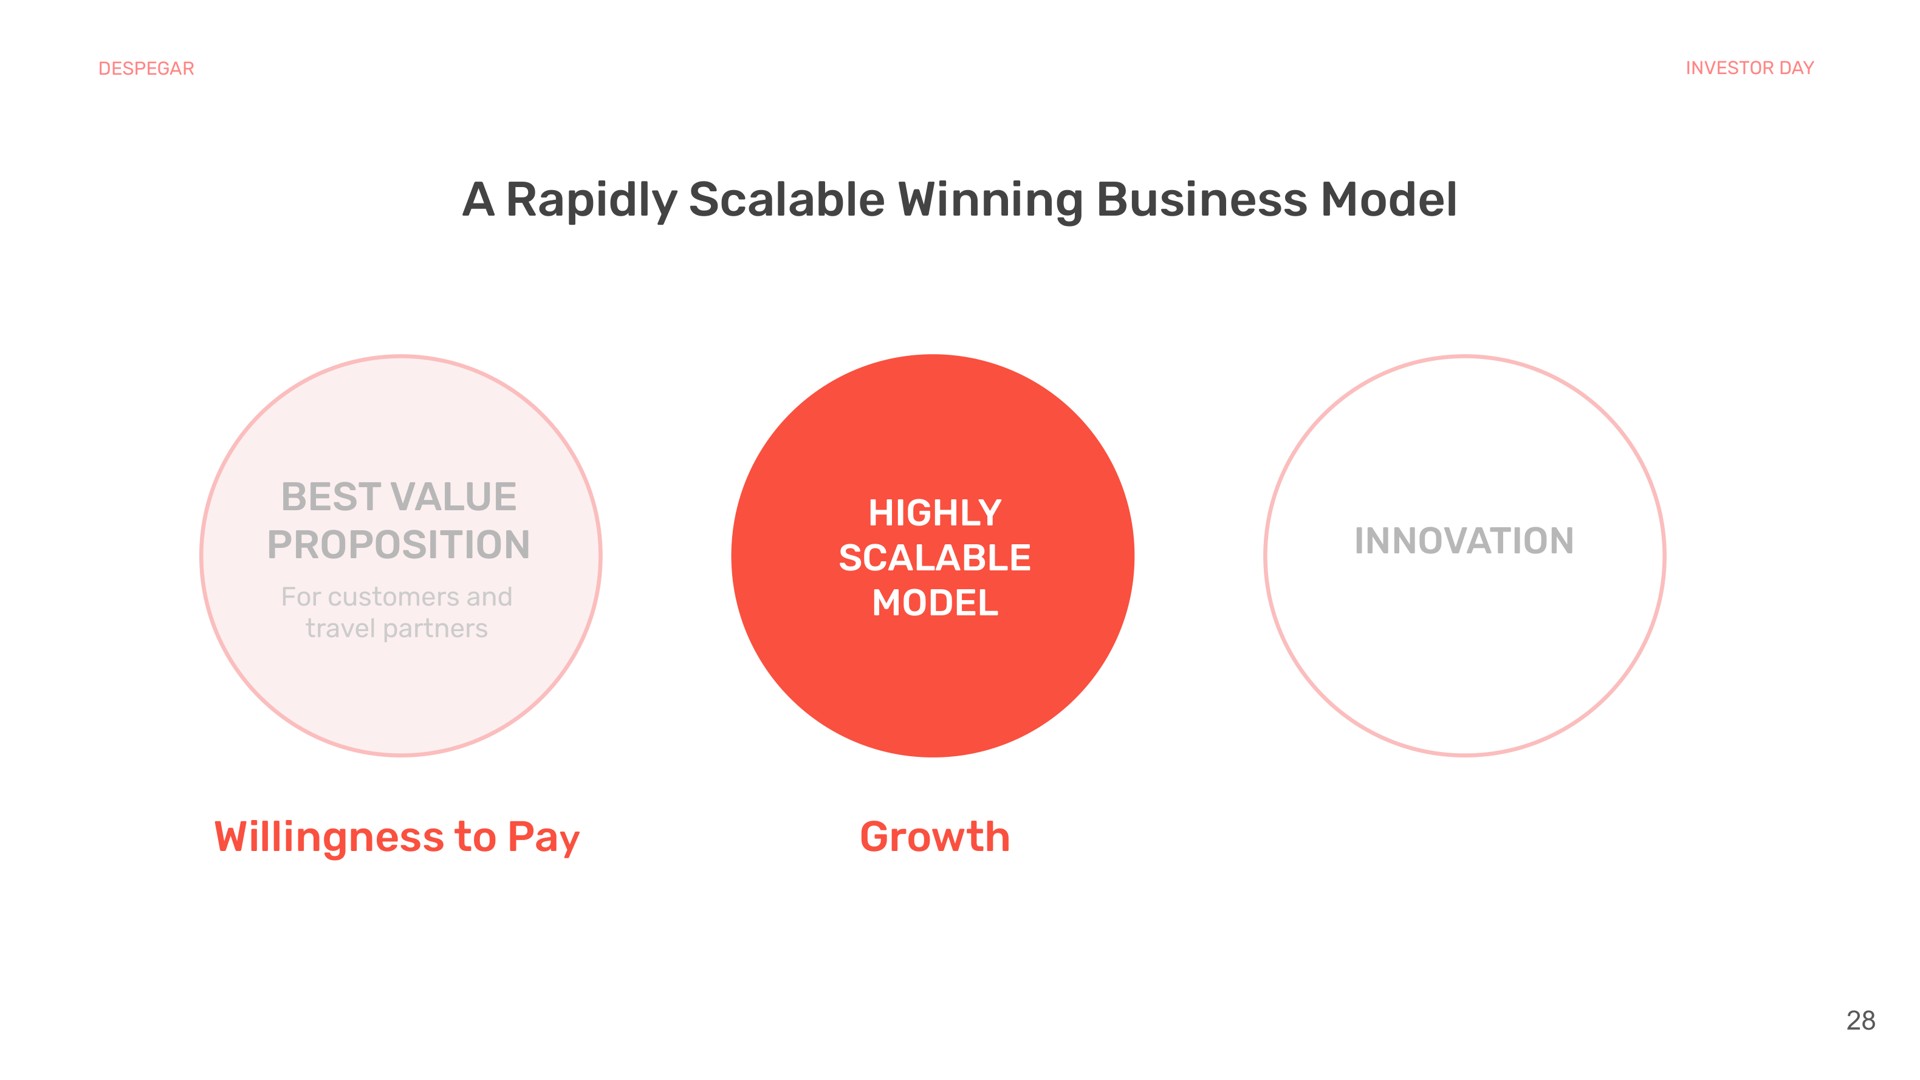 a rapidly scalable winning business model best value proposition for customers and travel partners highly scalable model innovation willingness to pay growth at | Despegar